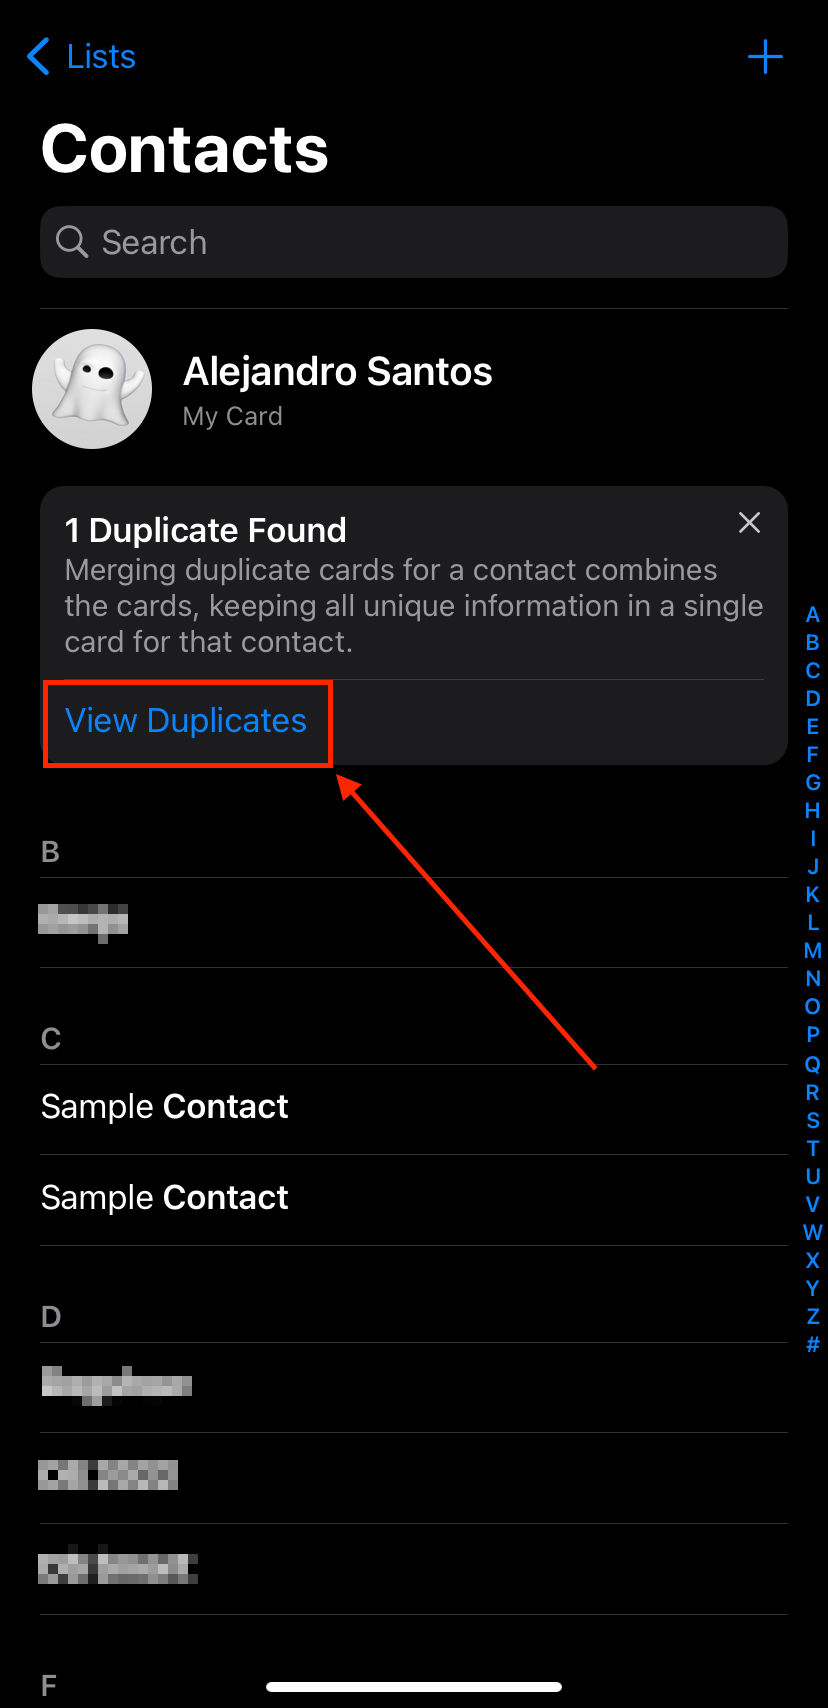 Duplicate Found notification in the iPhone's Contacts app